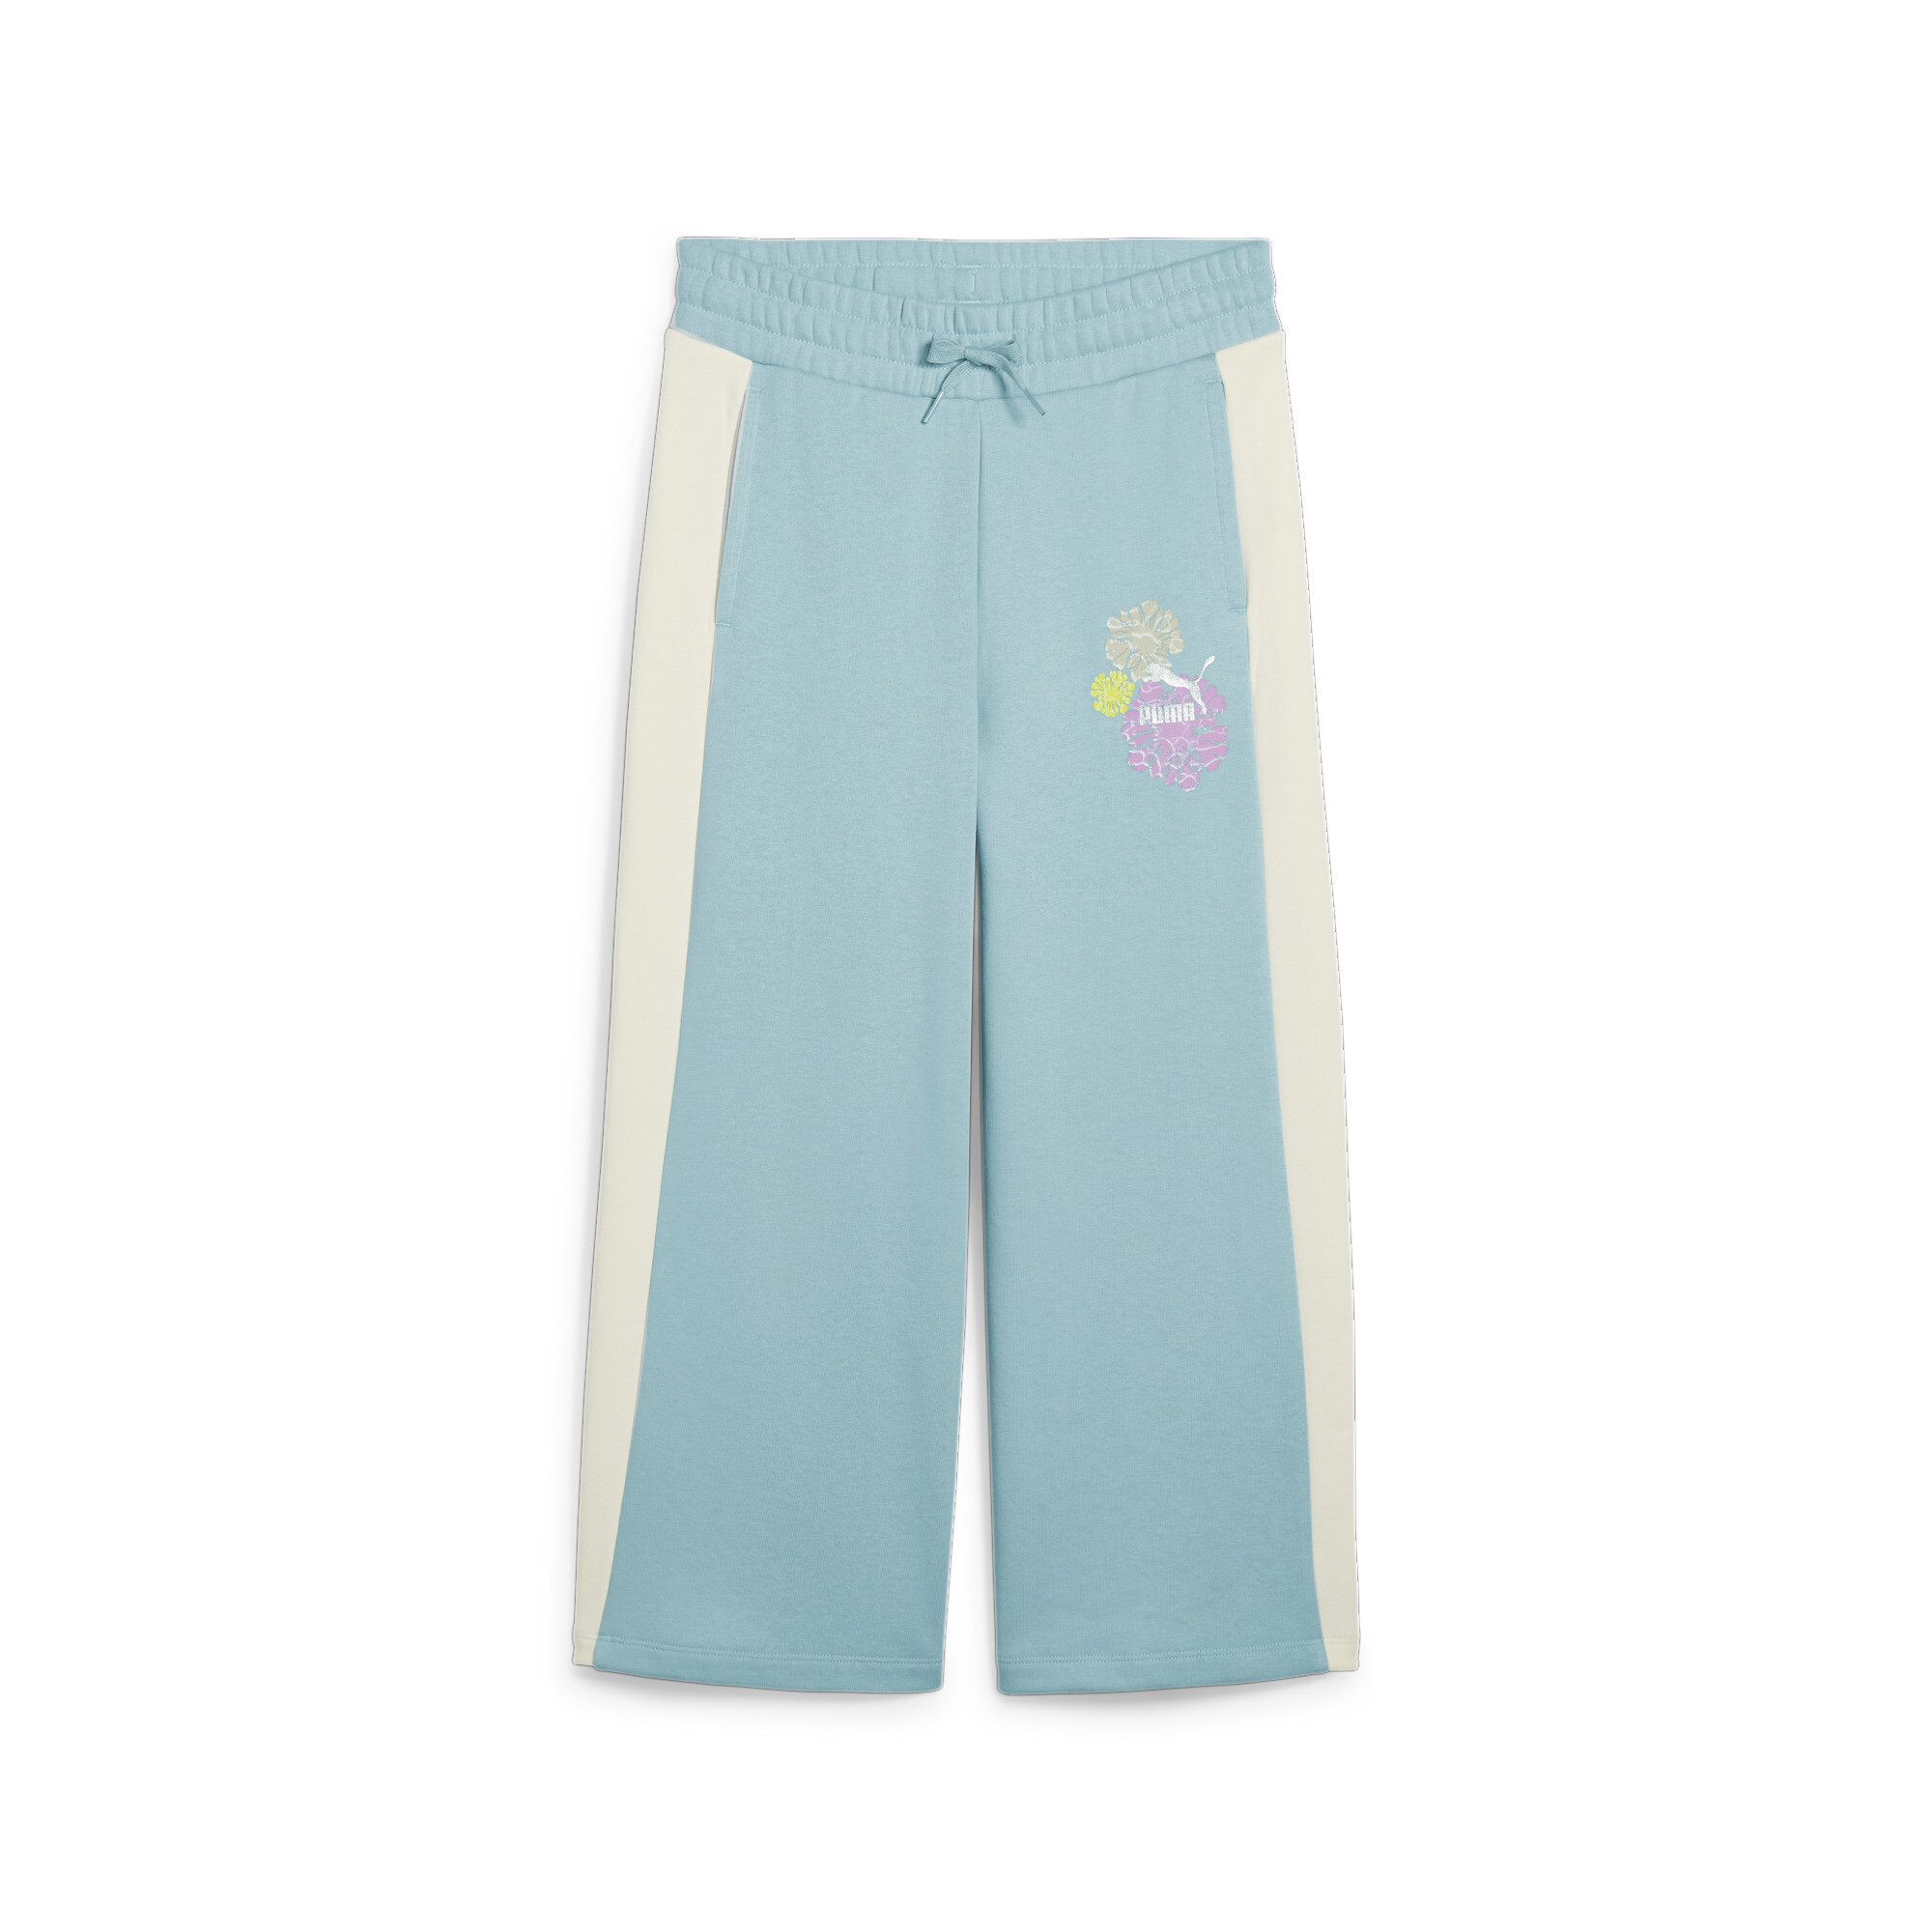 PUMA T7 SNFLR Girls' 7/8 Sweatpants In Blue, Size 7-8 Youth